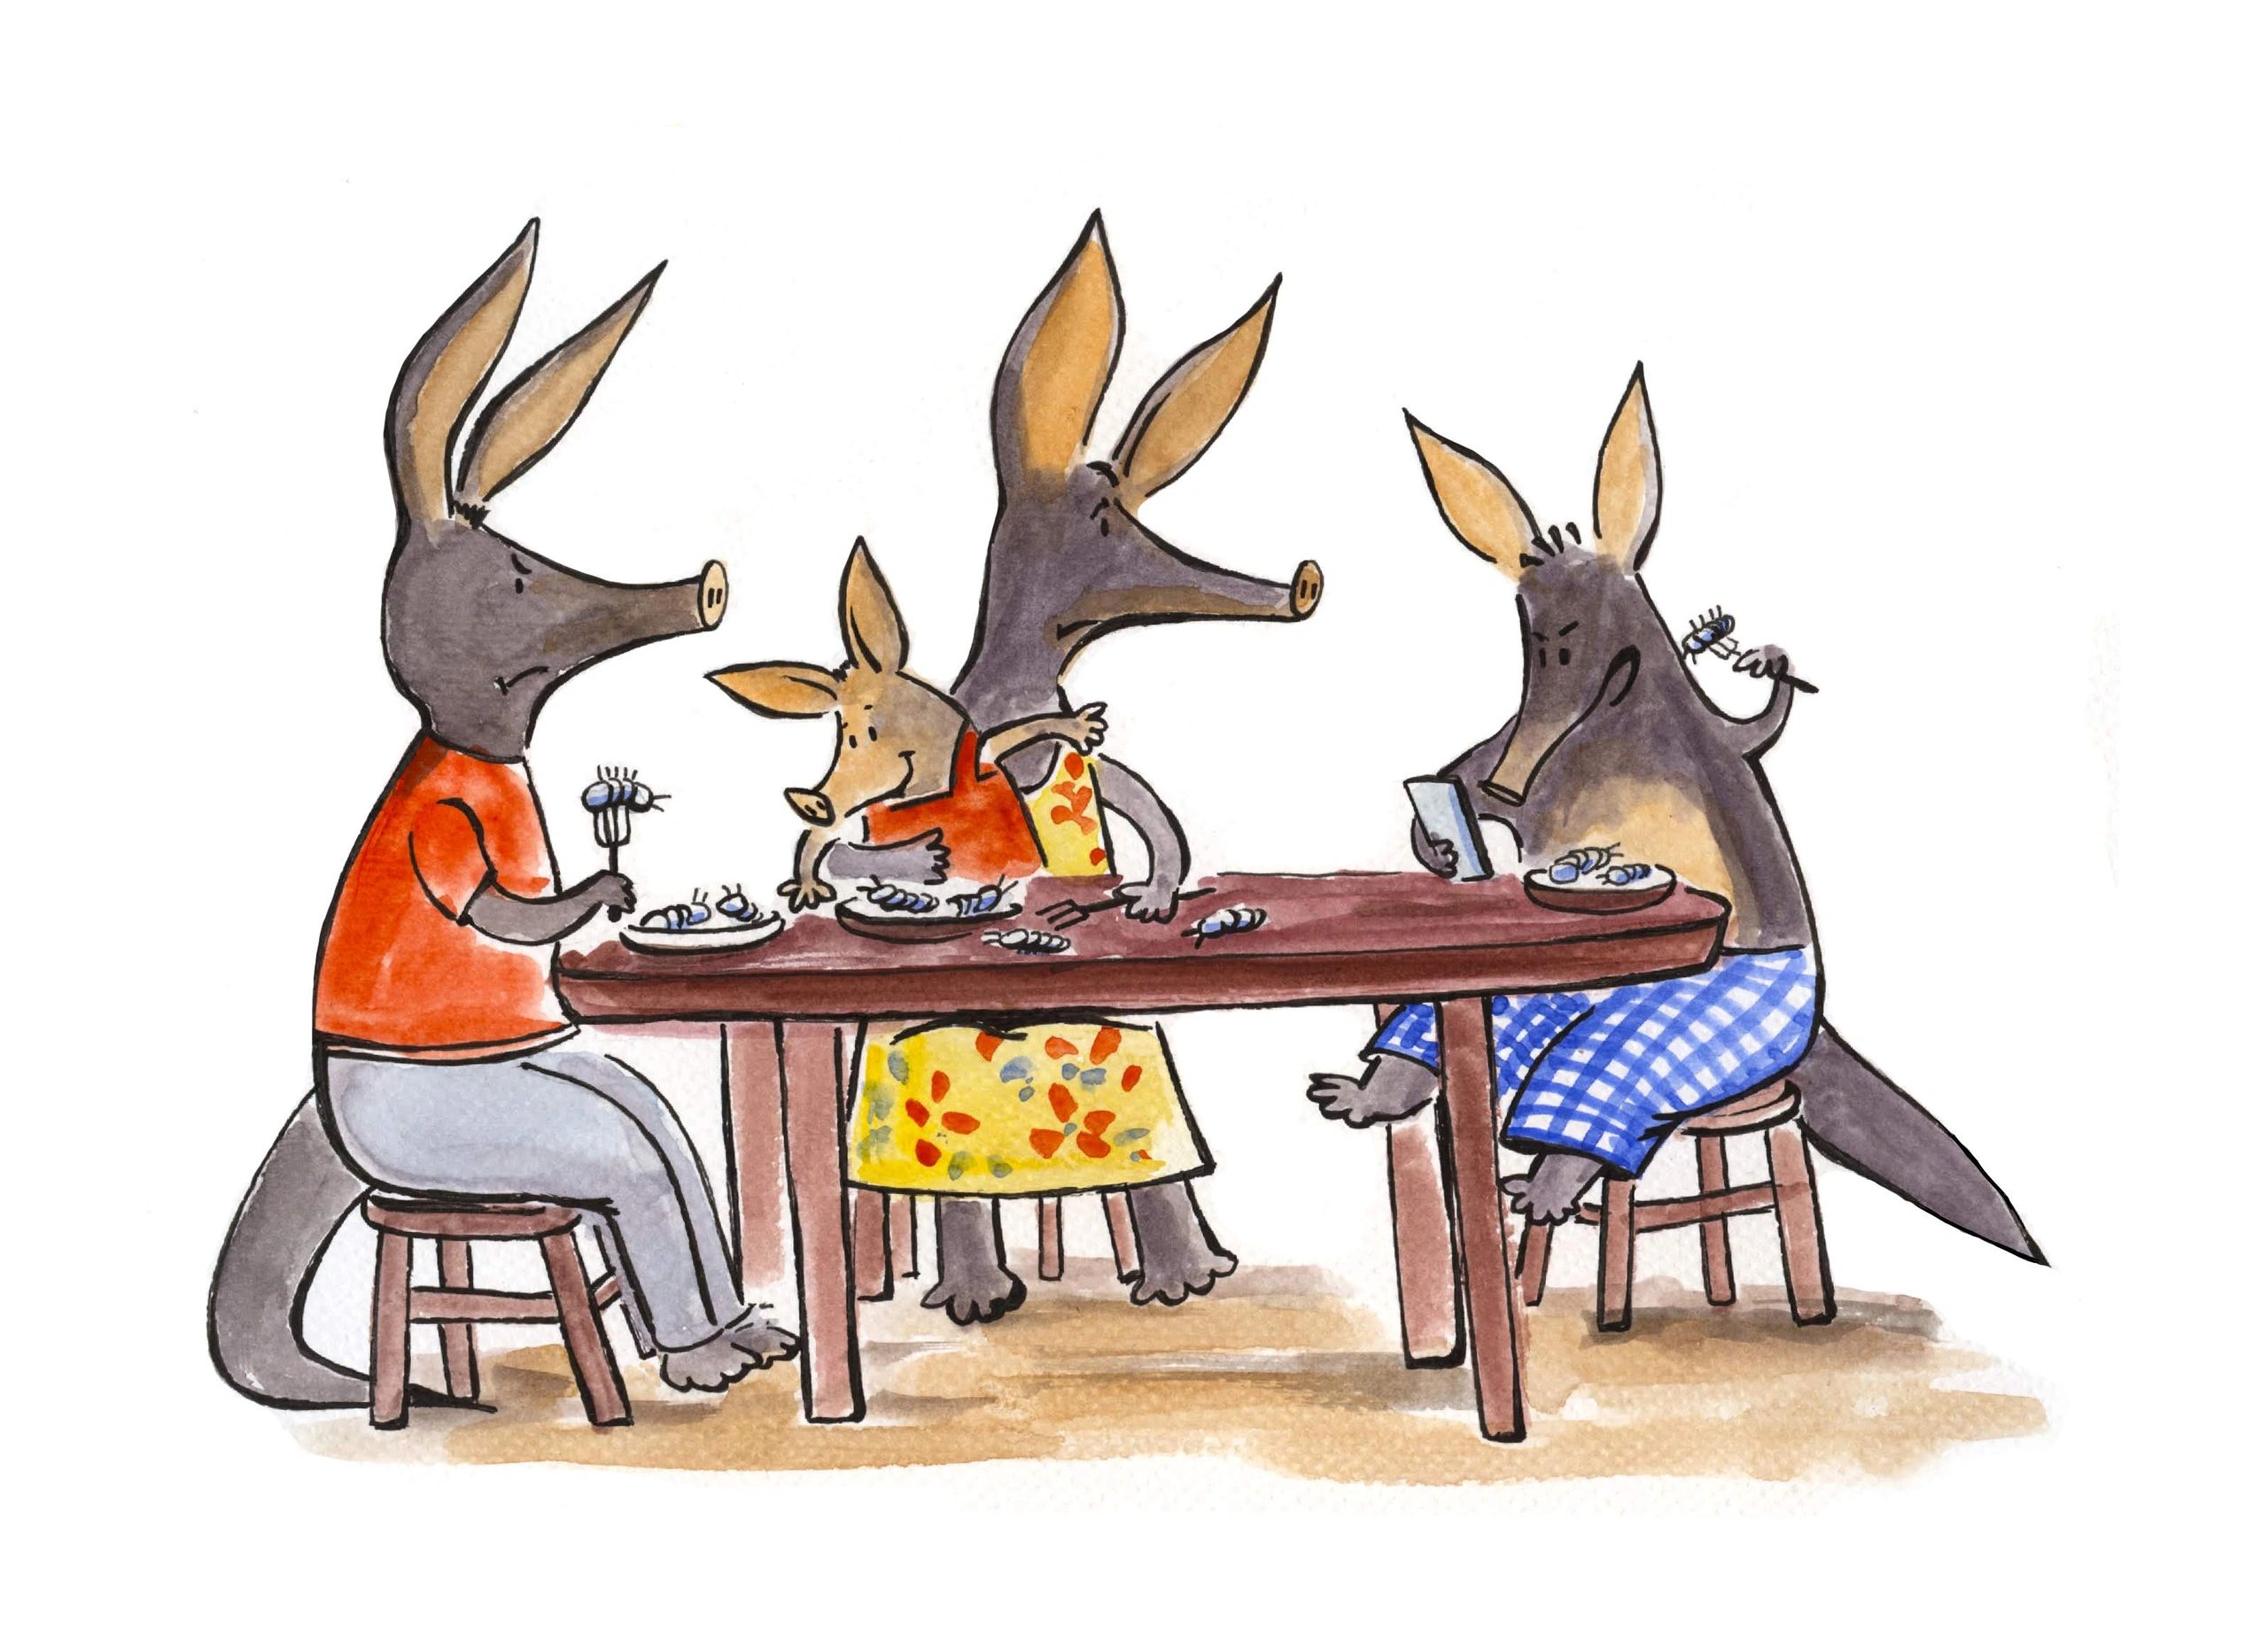 Aardvark family at dinner table. Parents visibly upset seeing their son on his cell phone. 